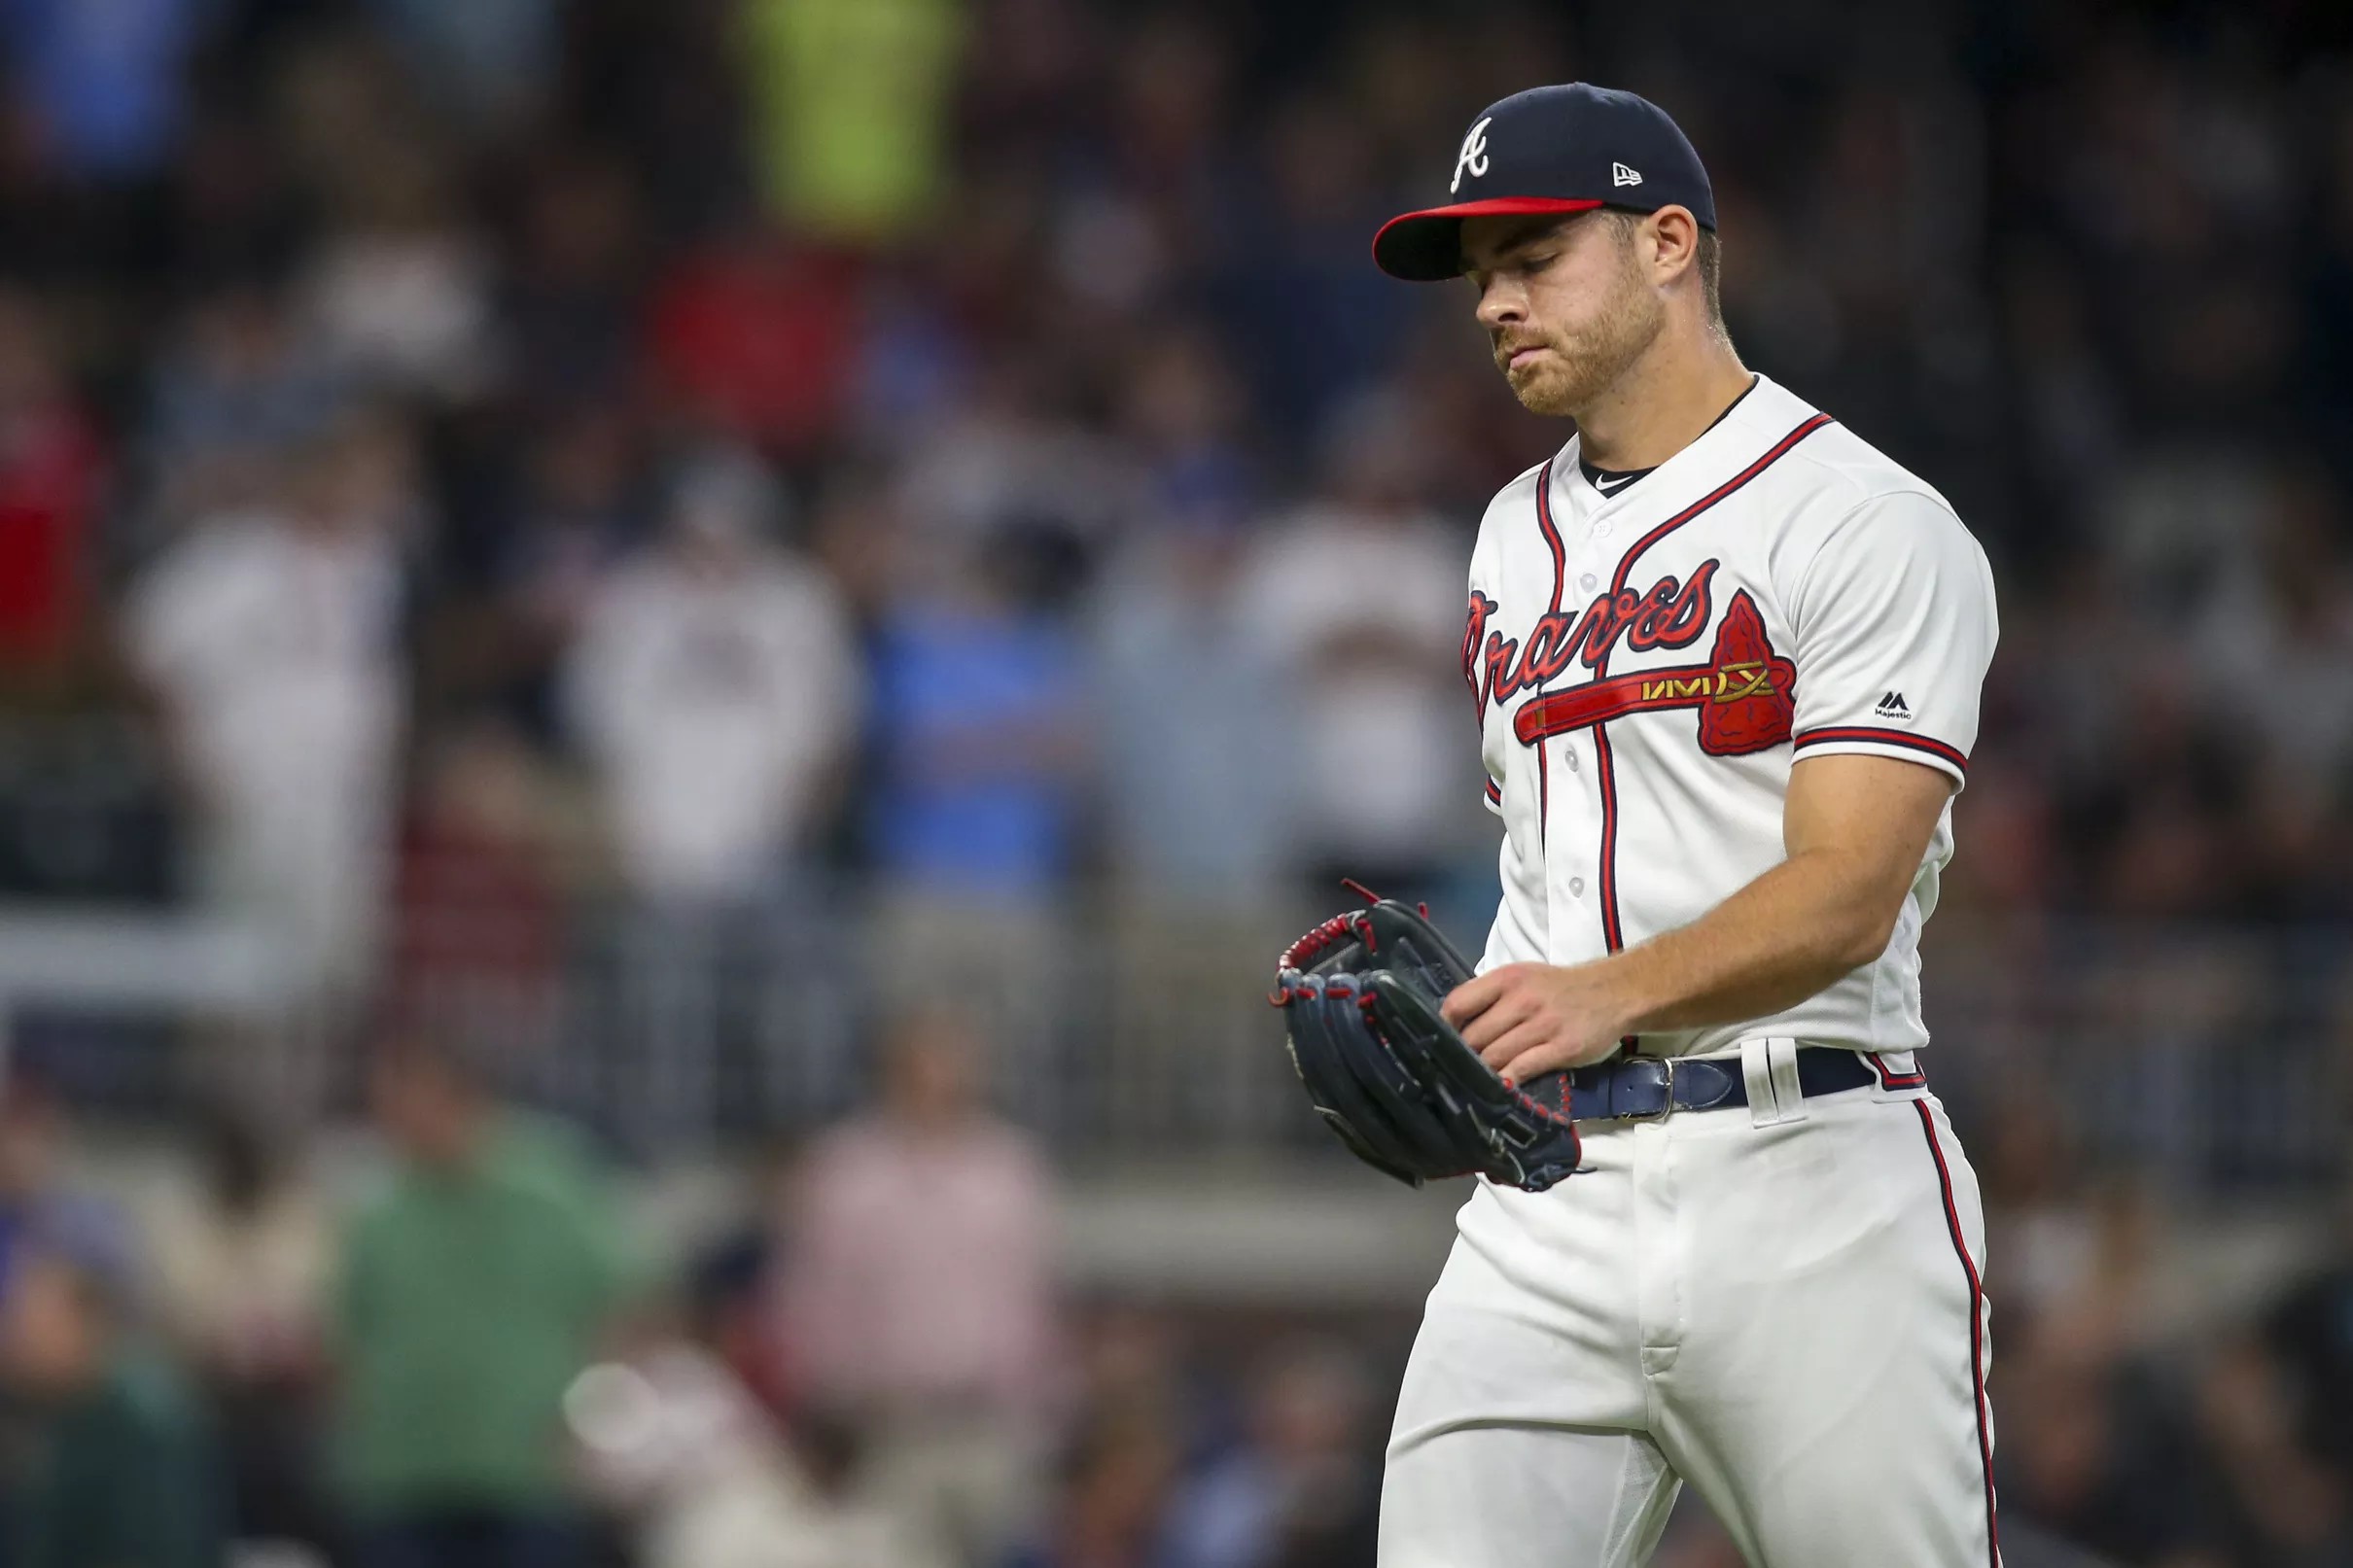 The Braves’ bullpen is walking batters at record pace